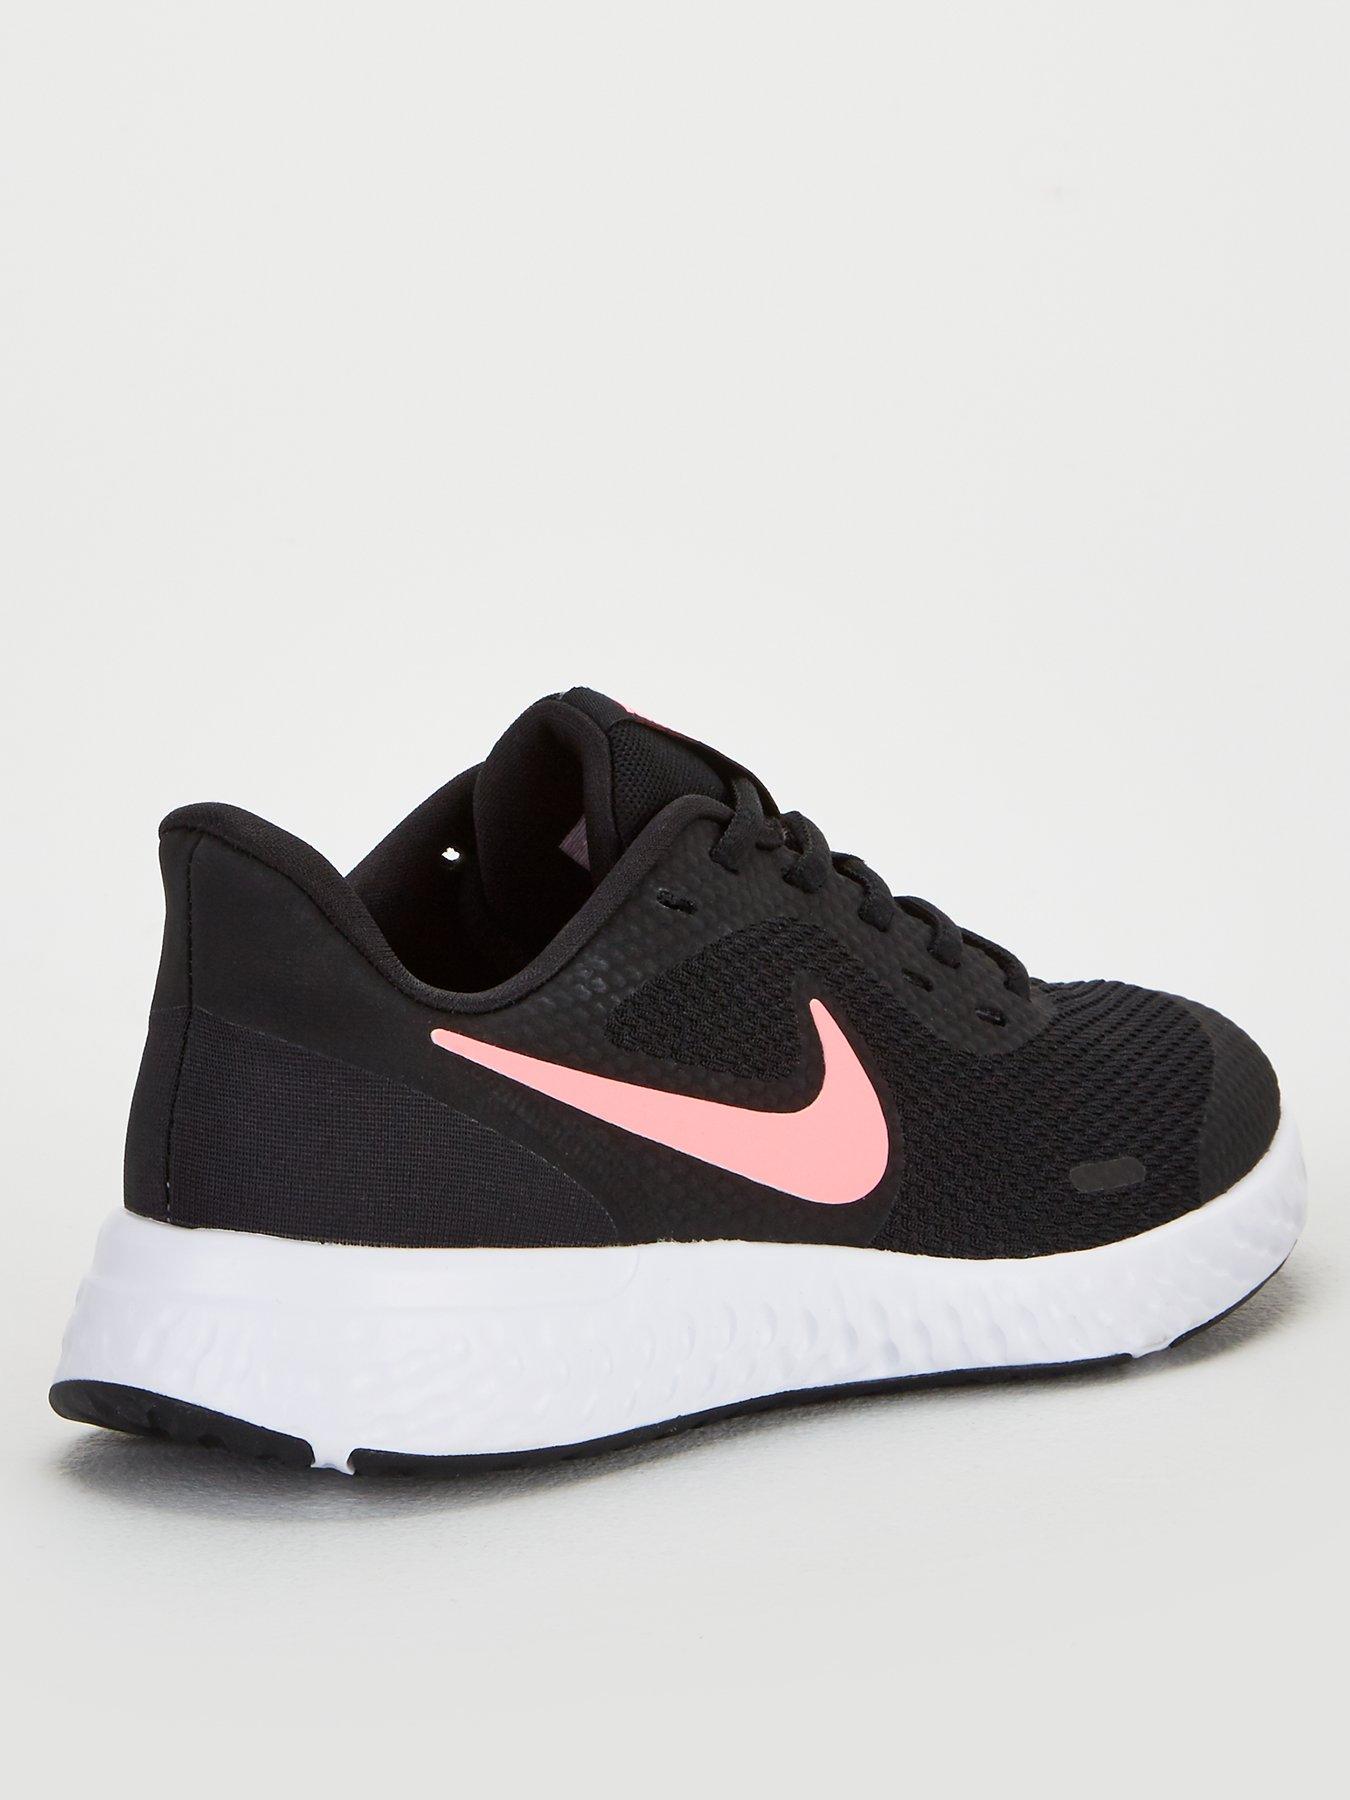 pink nike toddler trainers